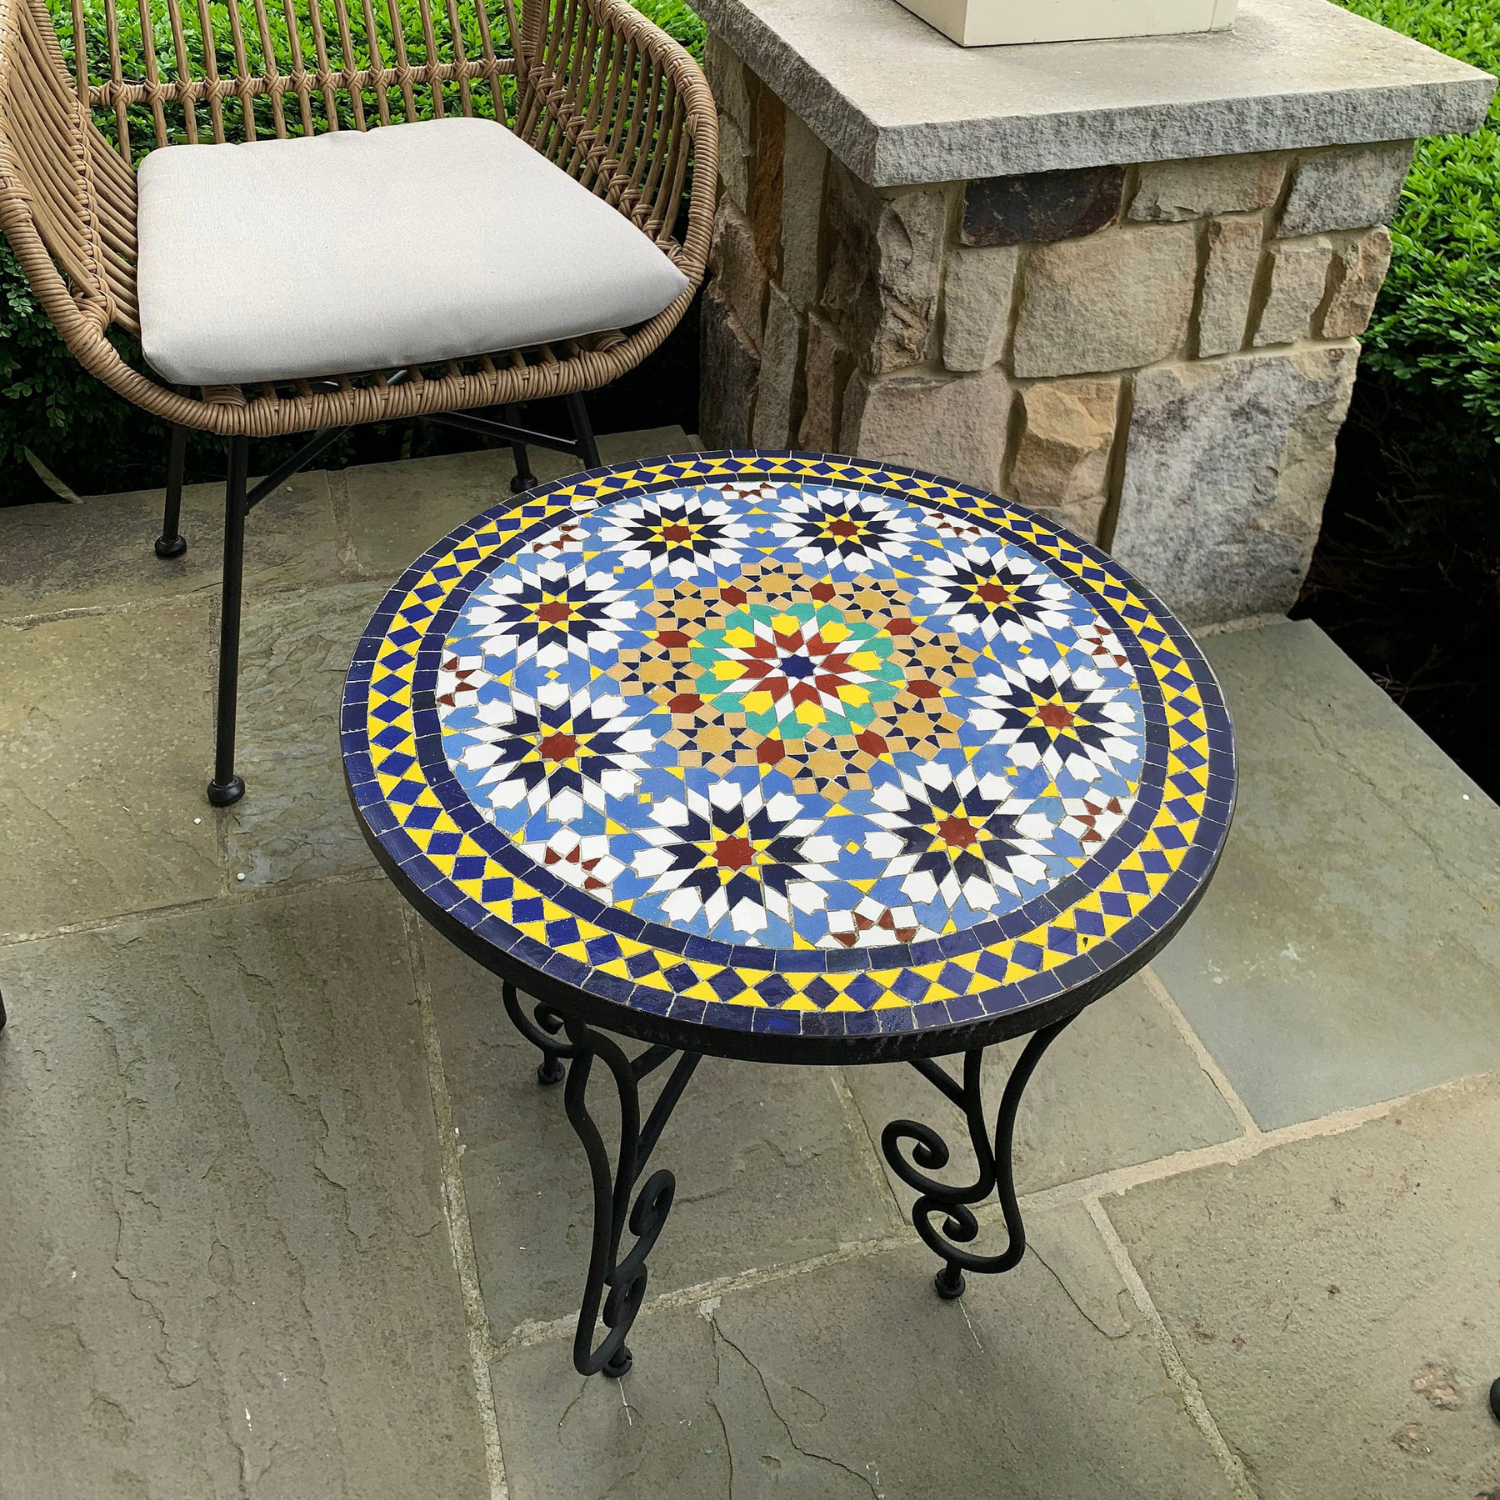  Moroccan mosaic table